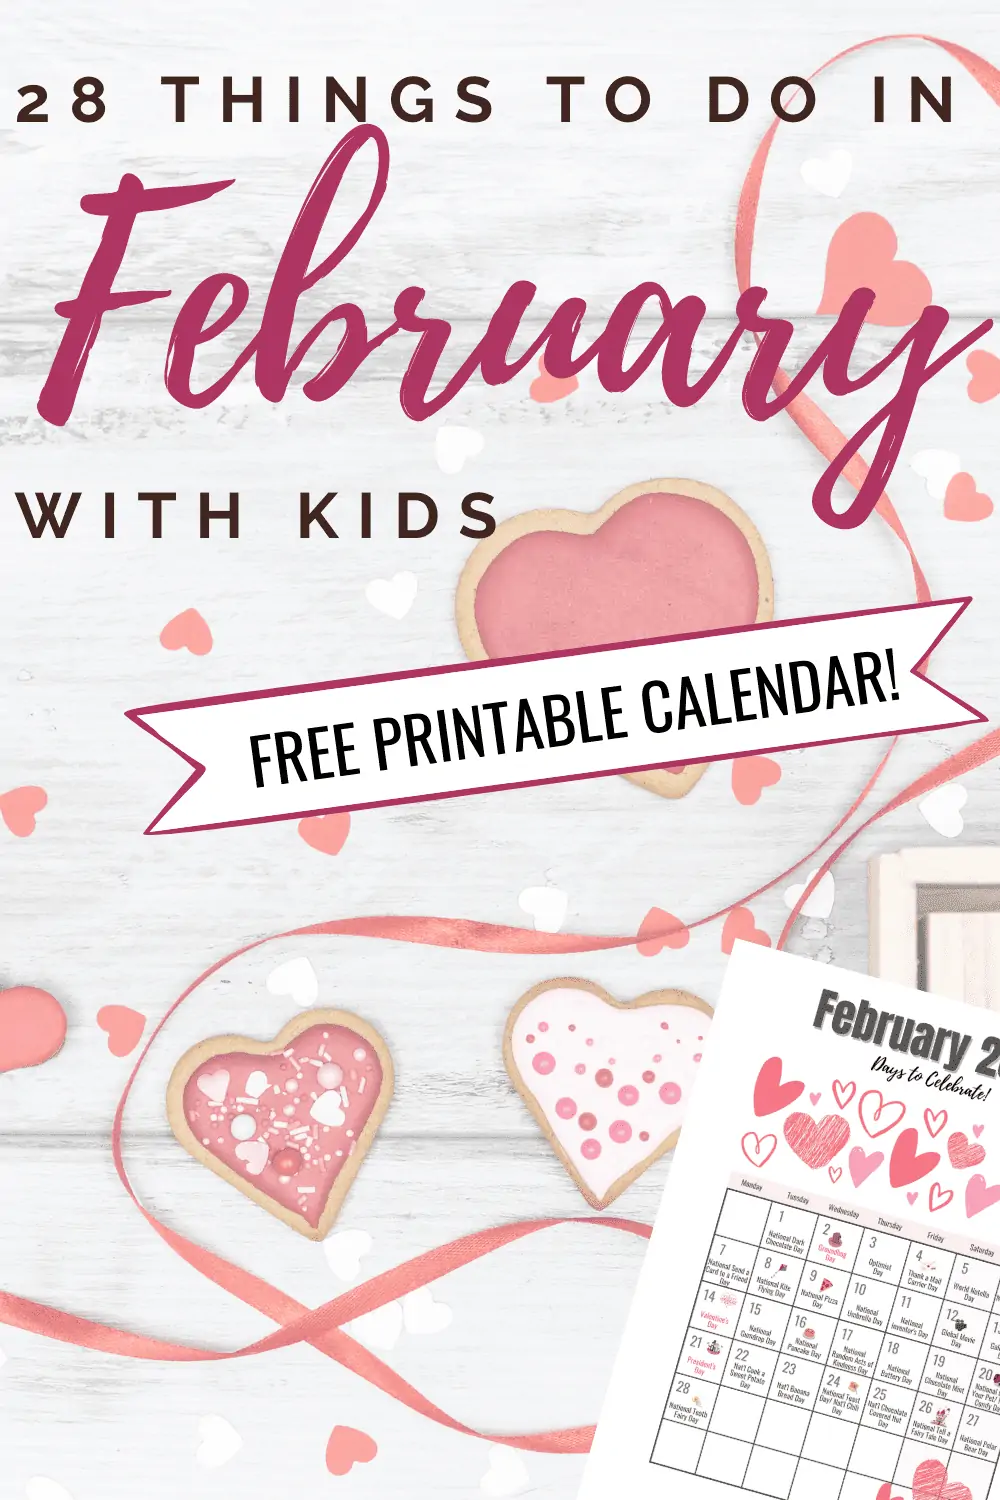 The Best National Days in February You\'ll Want to Enjoy With Your Kids